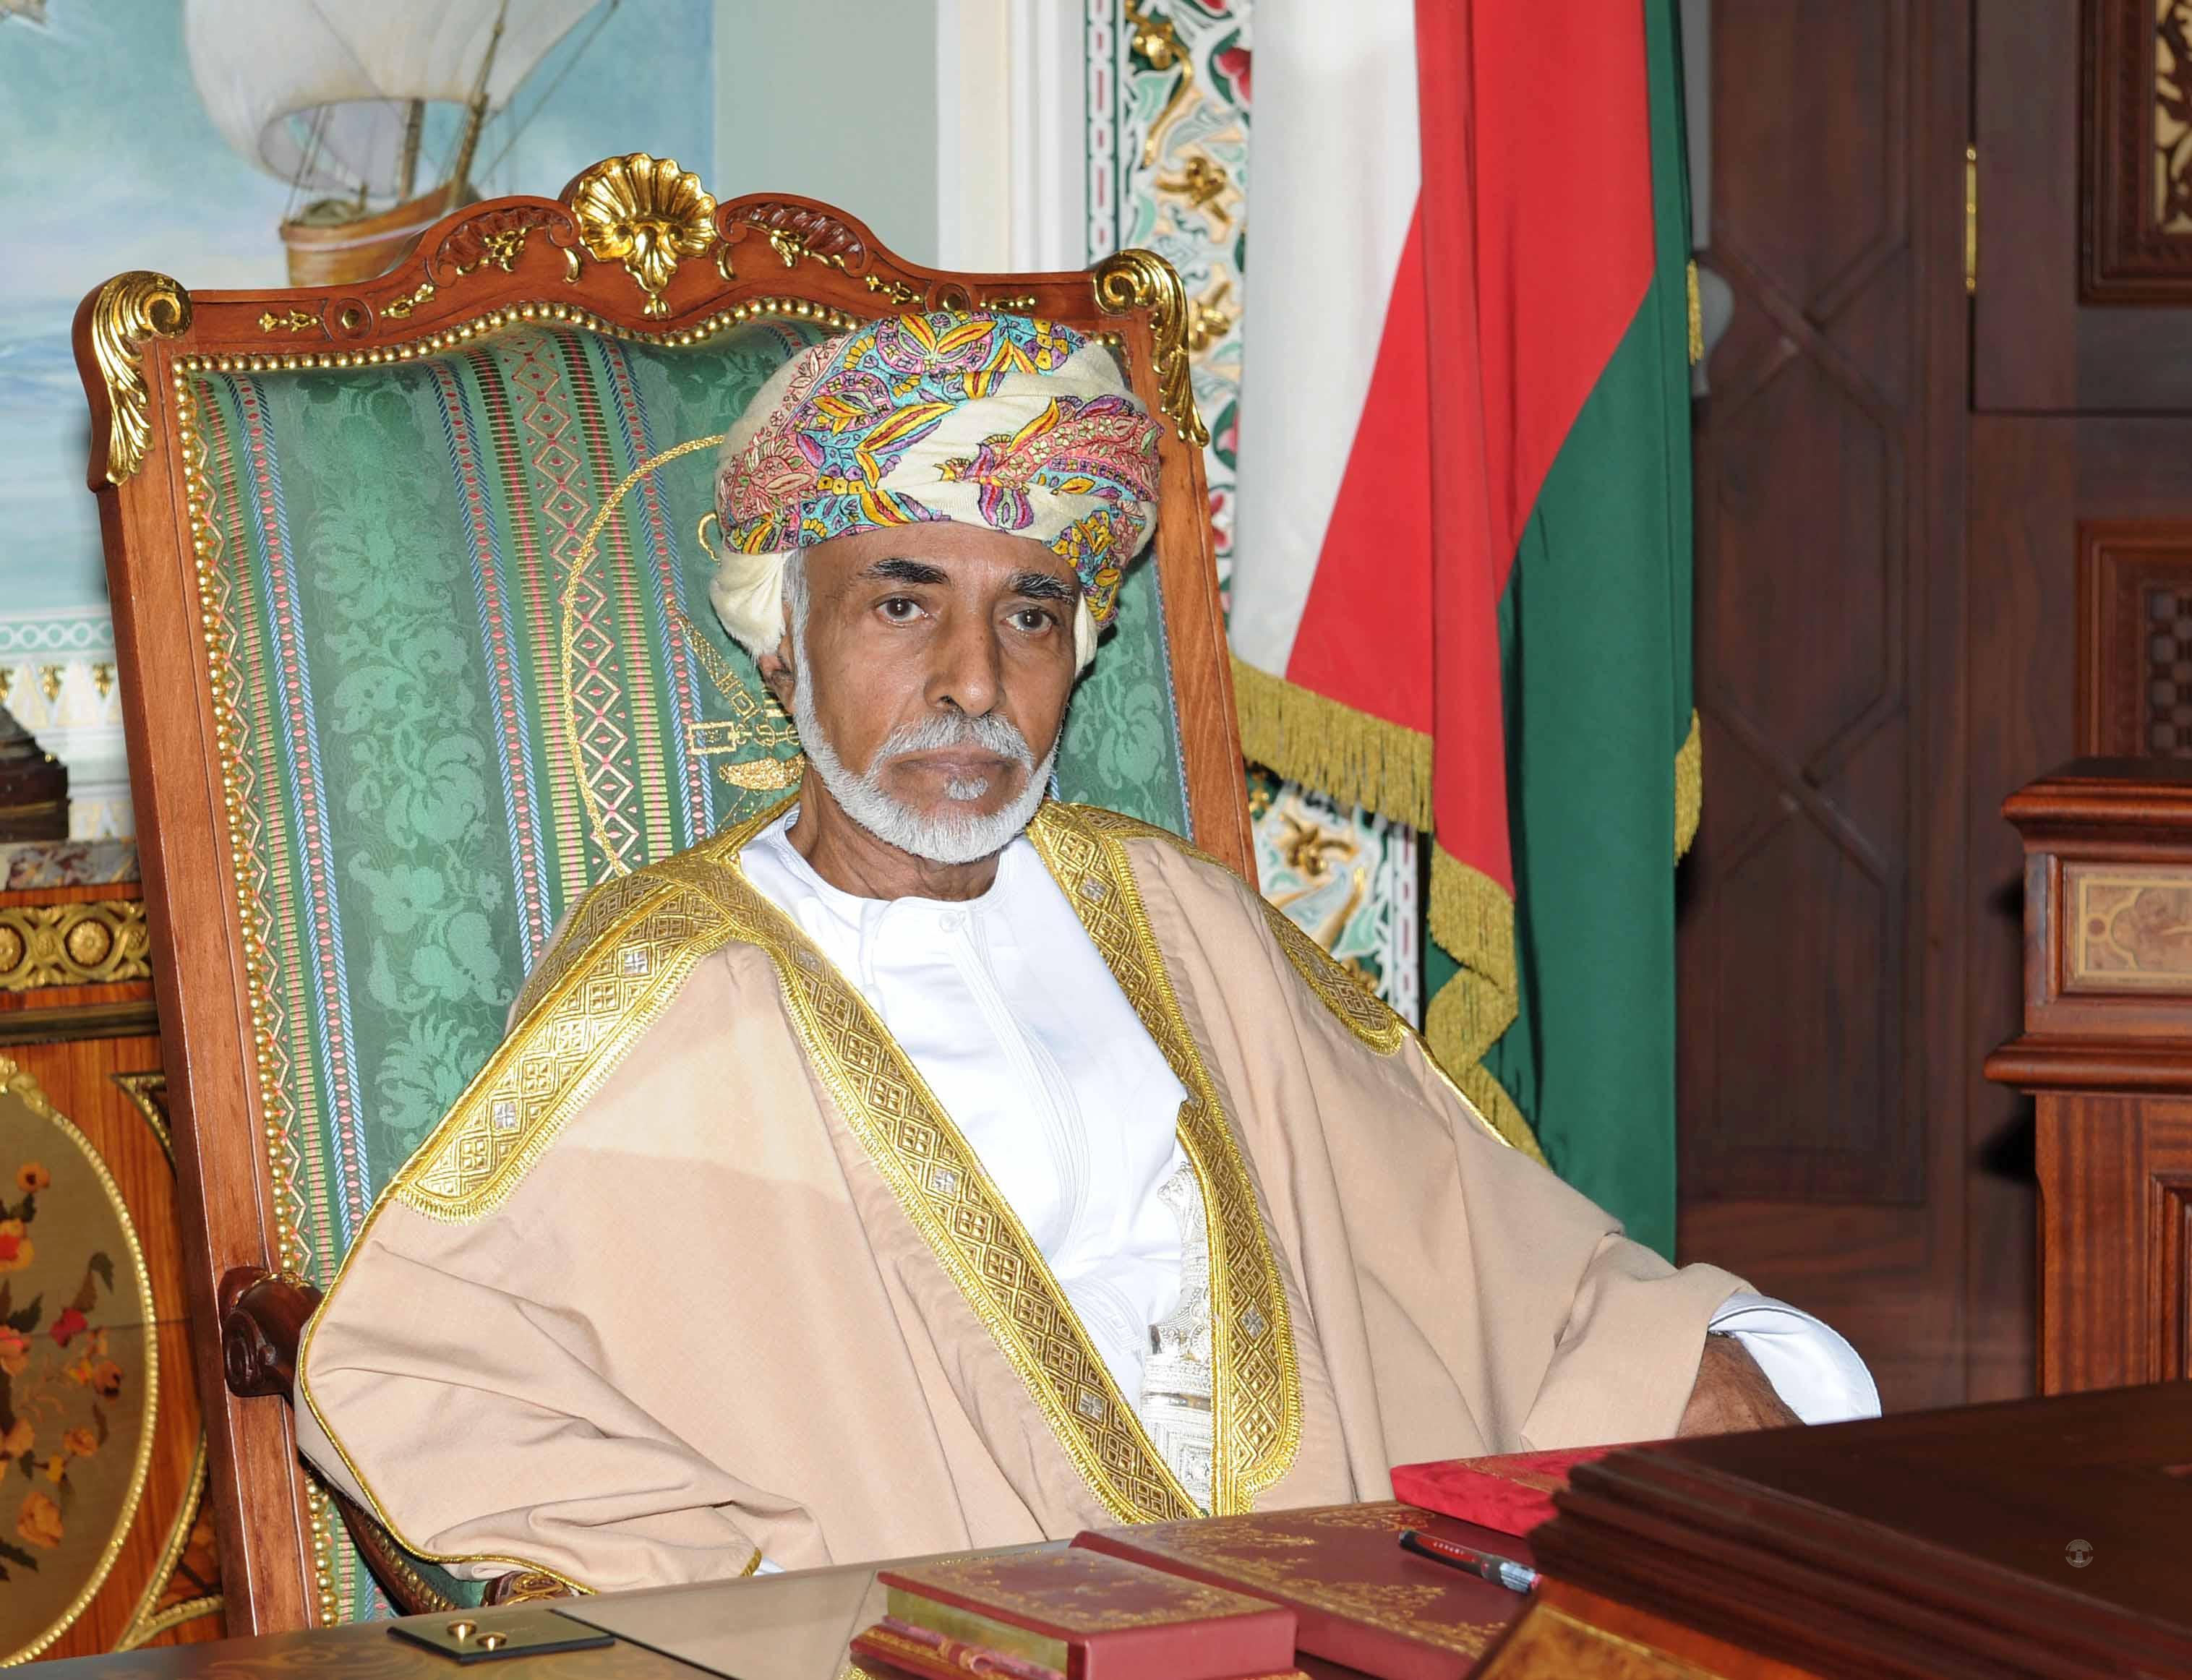 His Majesty Sultan Qaboos receives greetings from Hungary and Greece